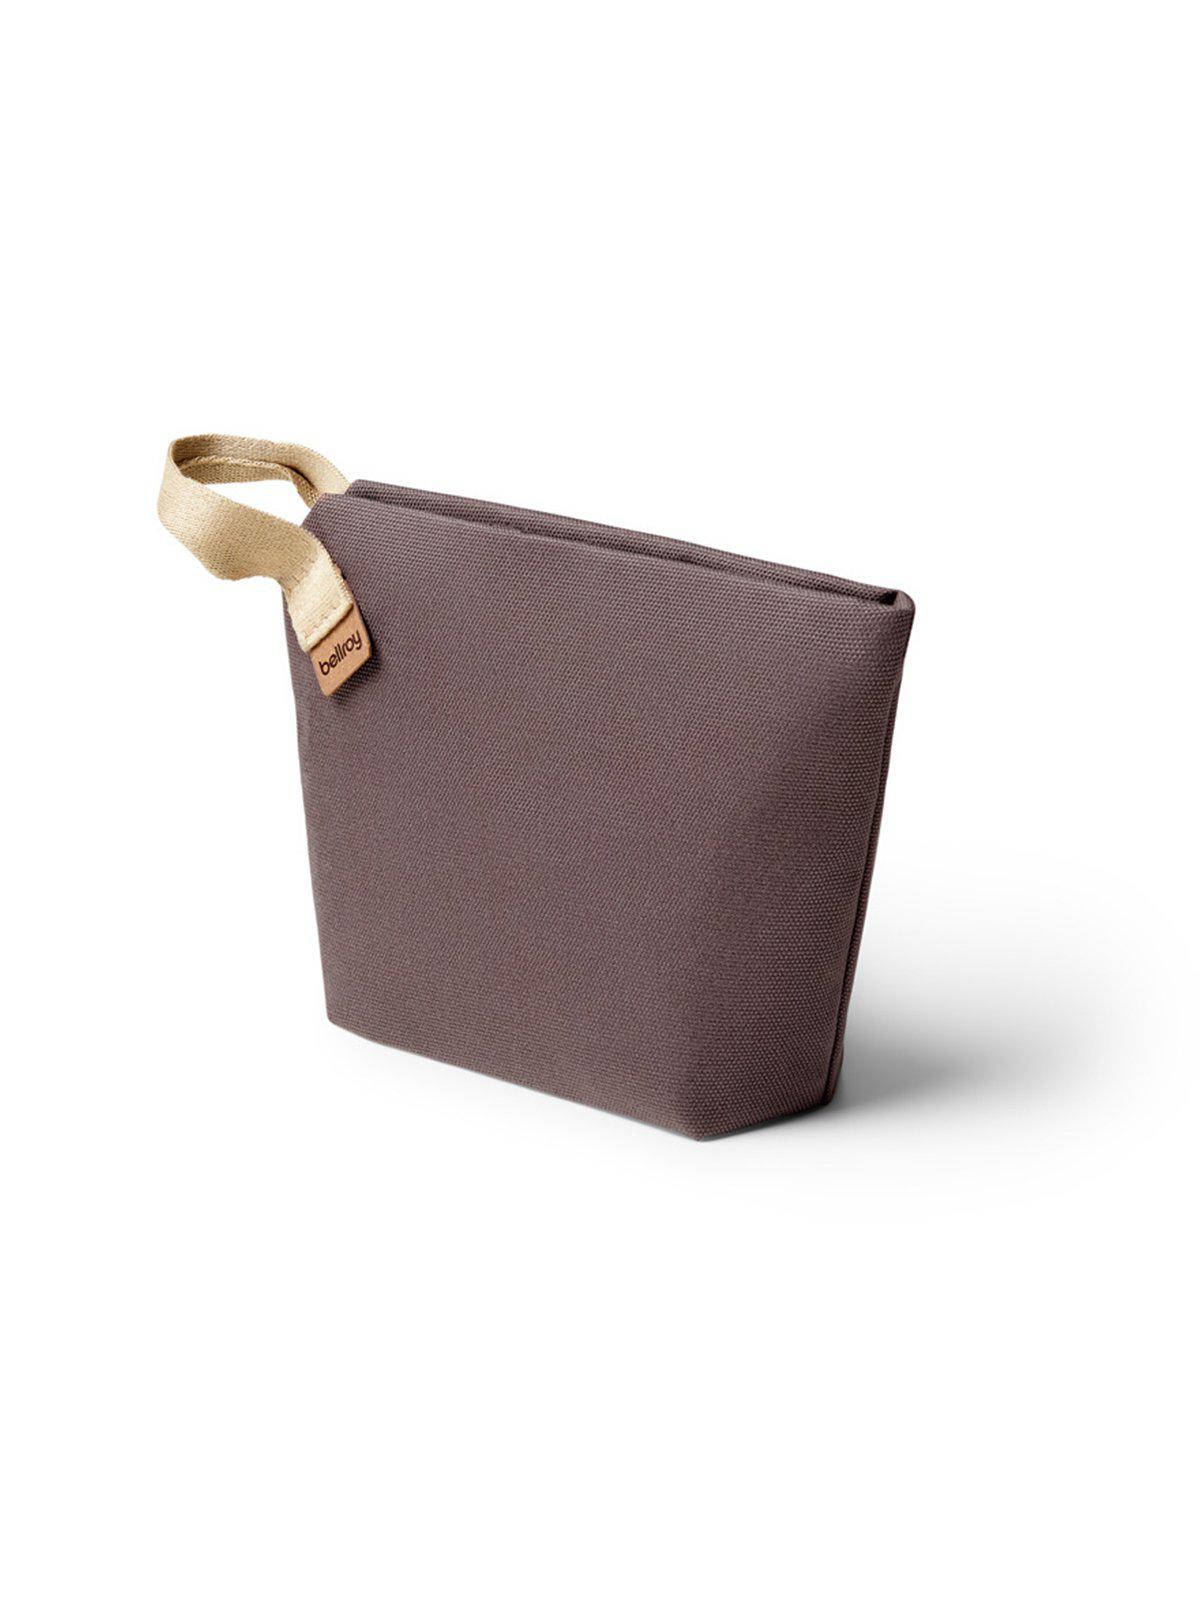 Bellroy Standing Pouch Gumnut (Plant-Based / Leather-Free)